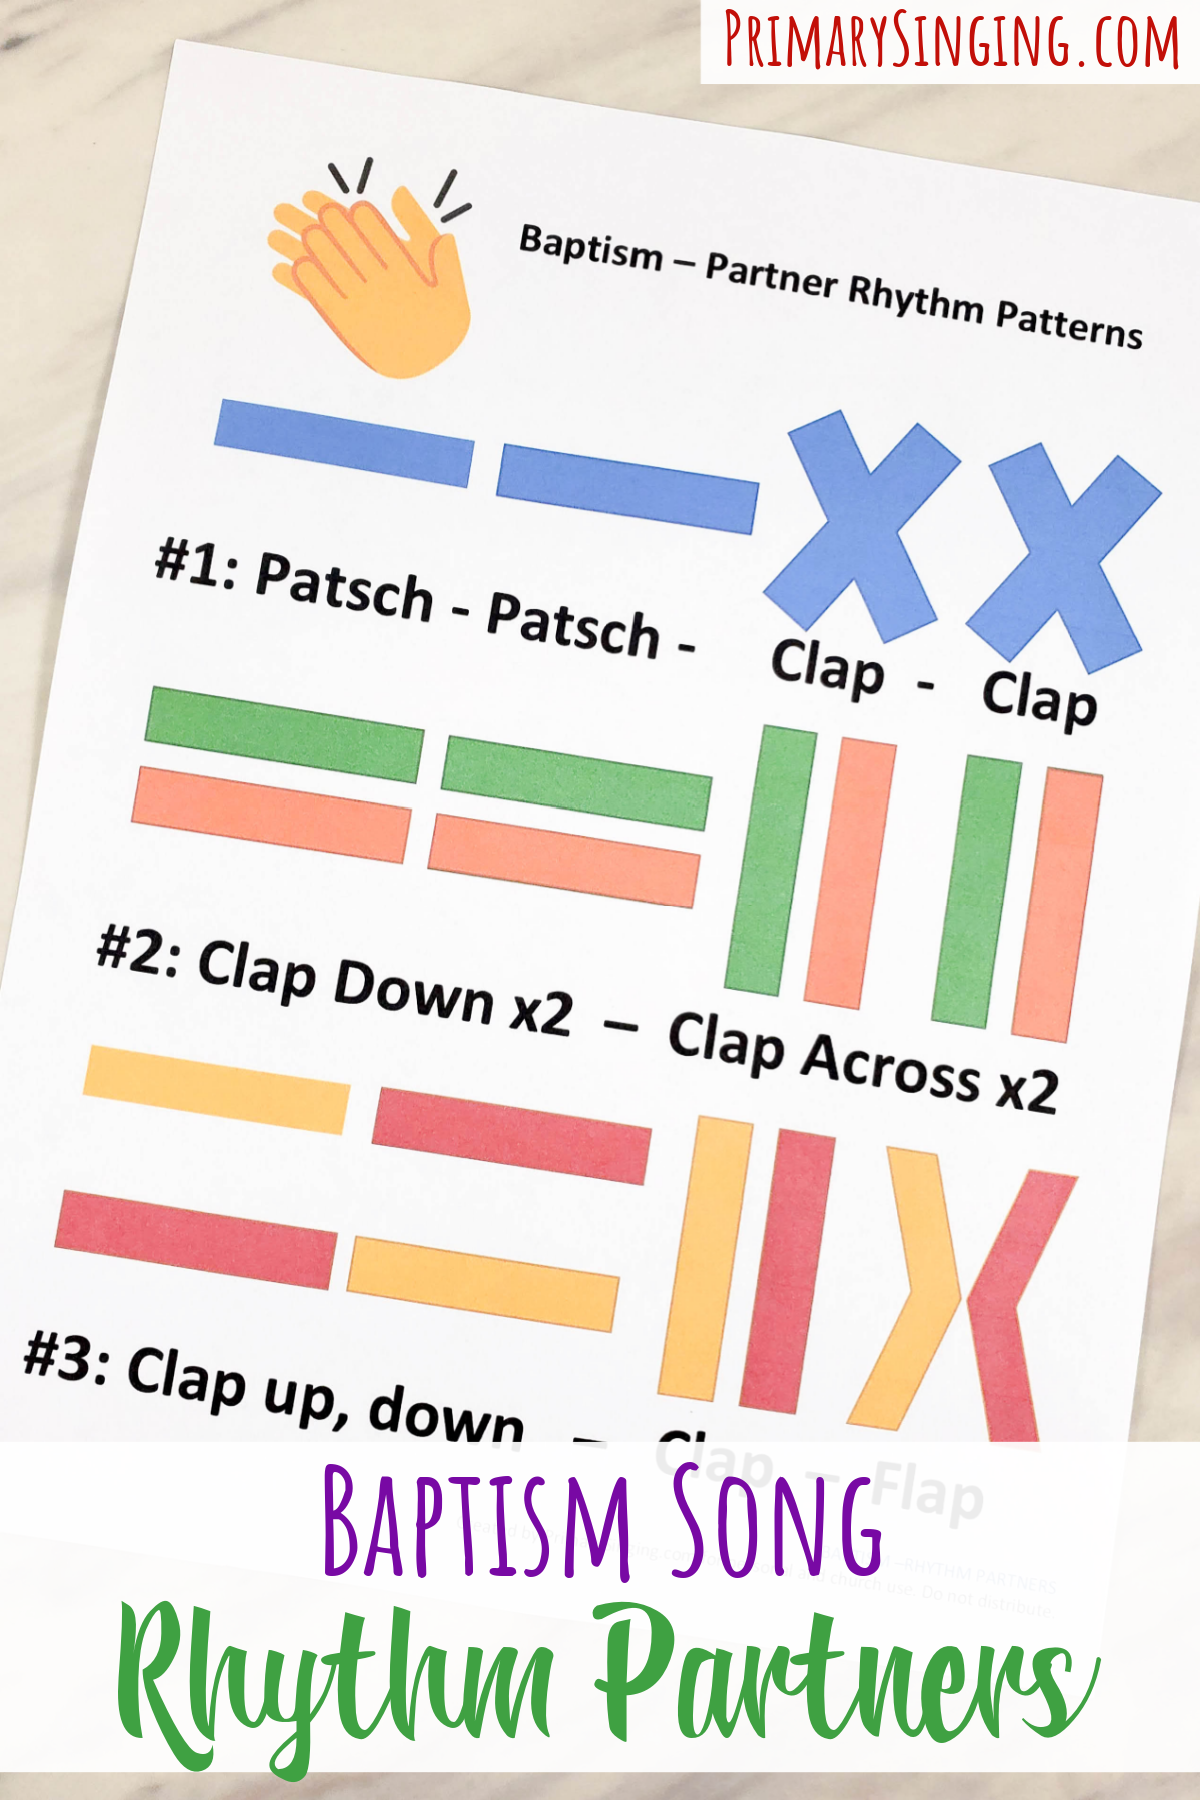 LDS Baptism Song - Body Rhythm Partners patterns free printable lesson plan for Primary Singing Time! Easy idea to teach Baptism song.